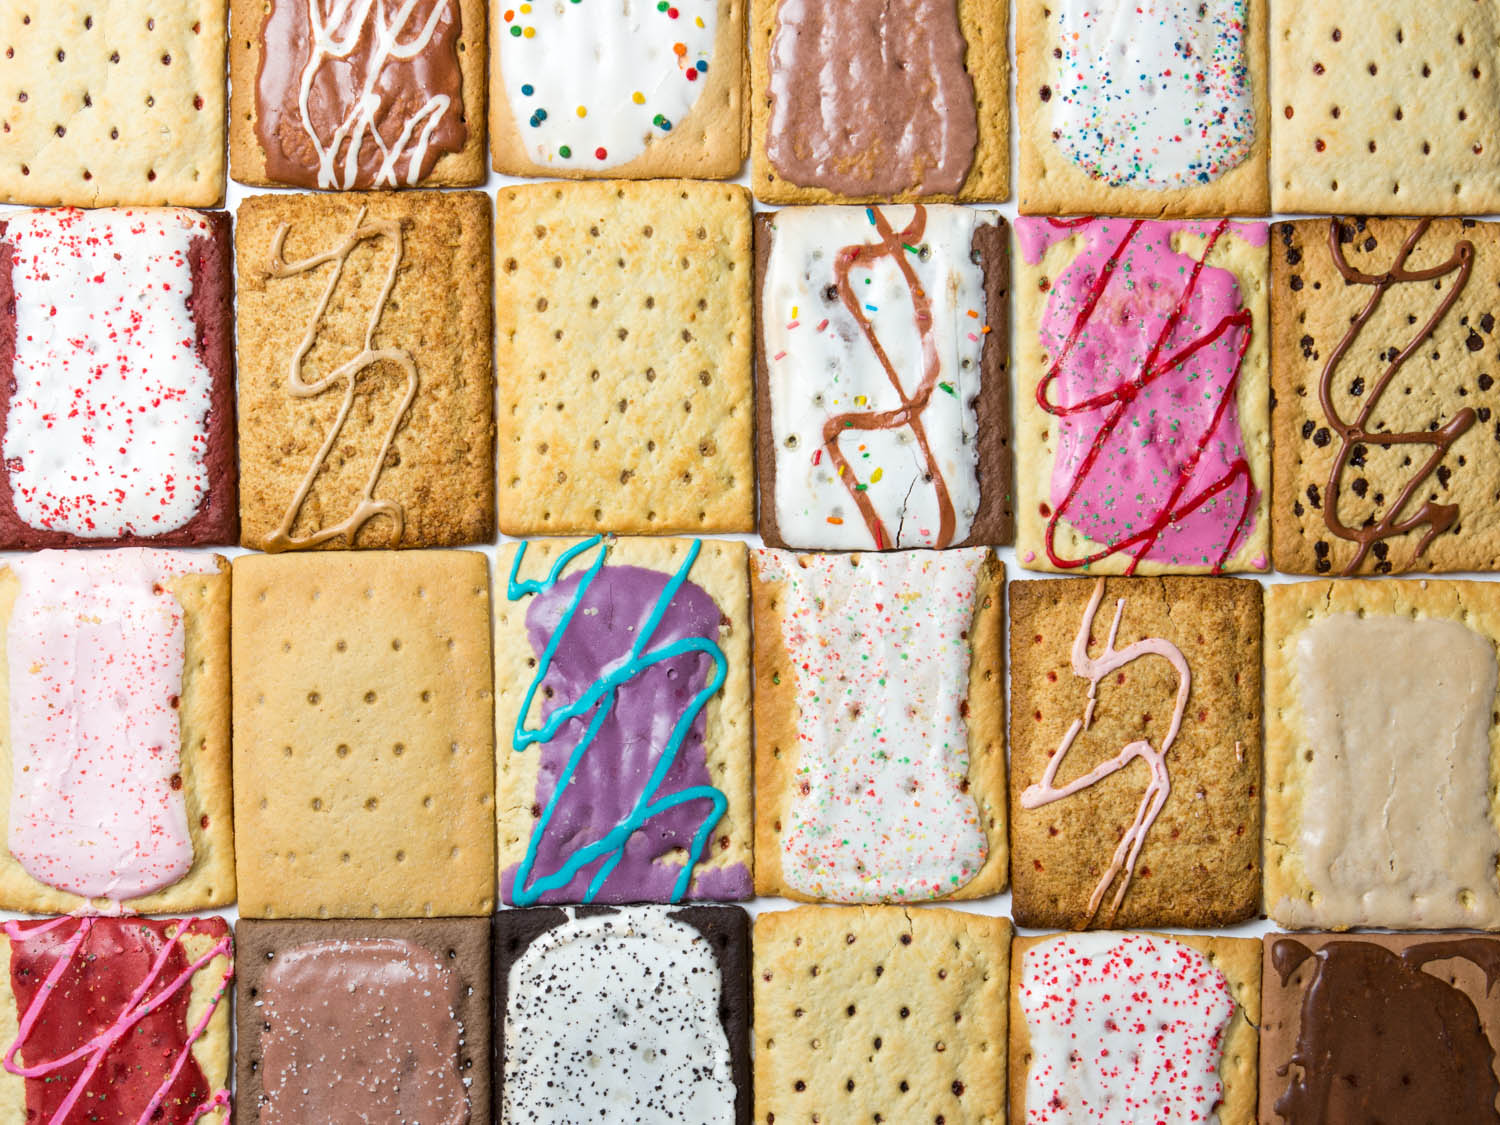 Do You Actually Prefer American or French Desserts? Pop-Tarts